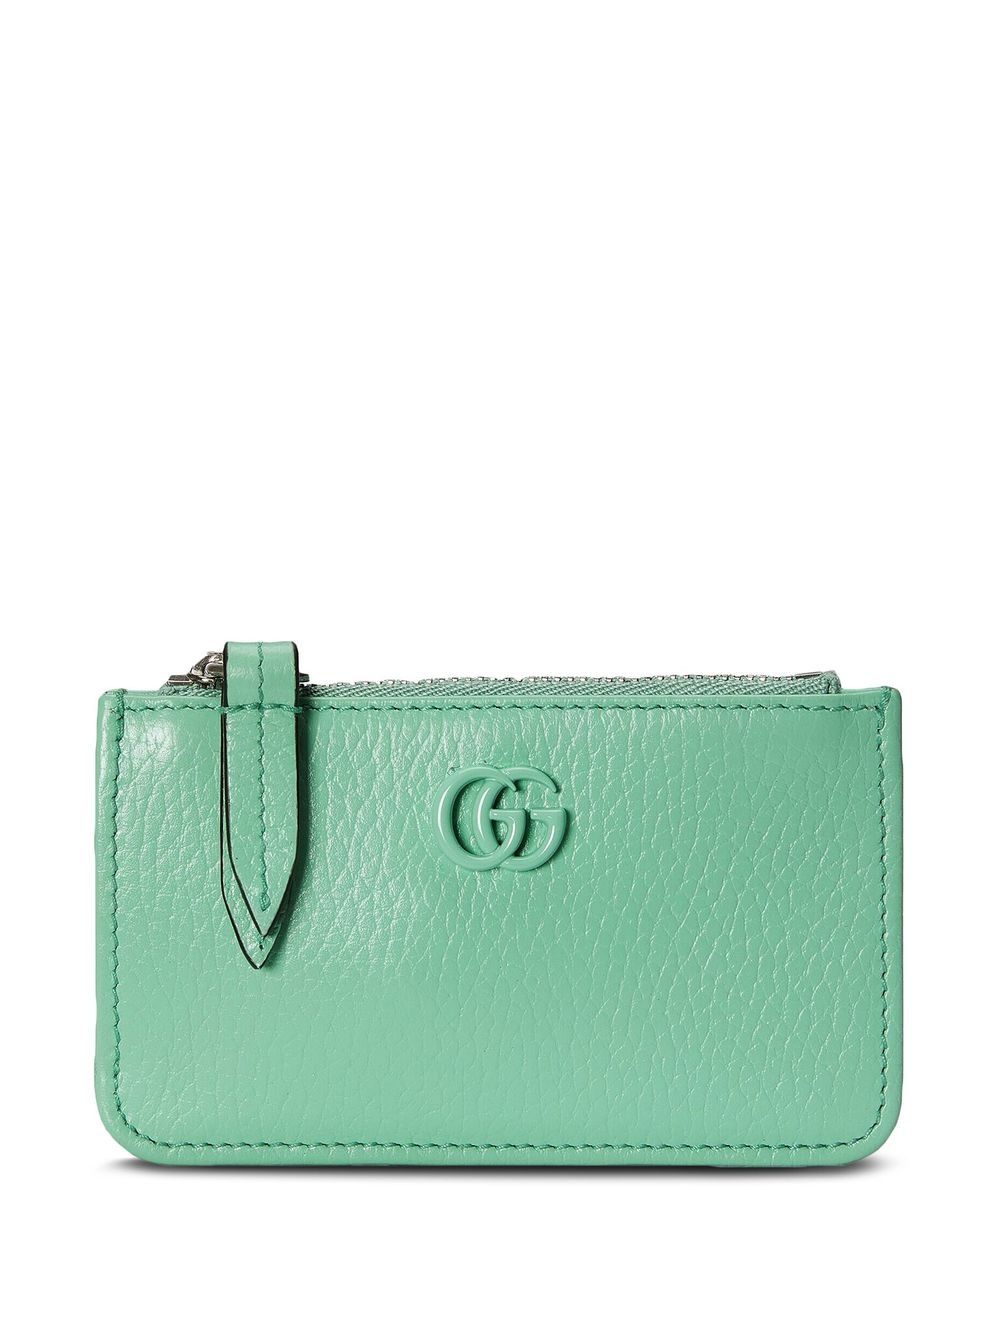 Gucci Gg Marmont Card Case In Green